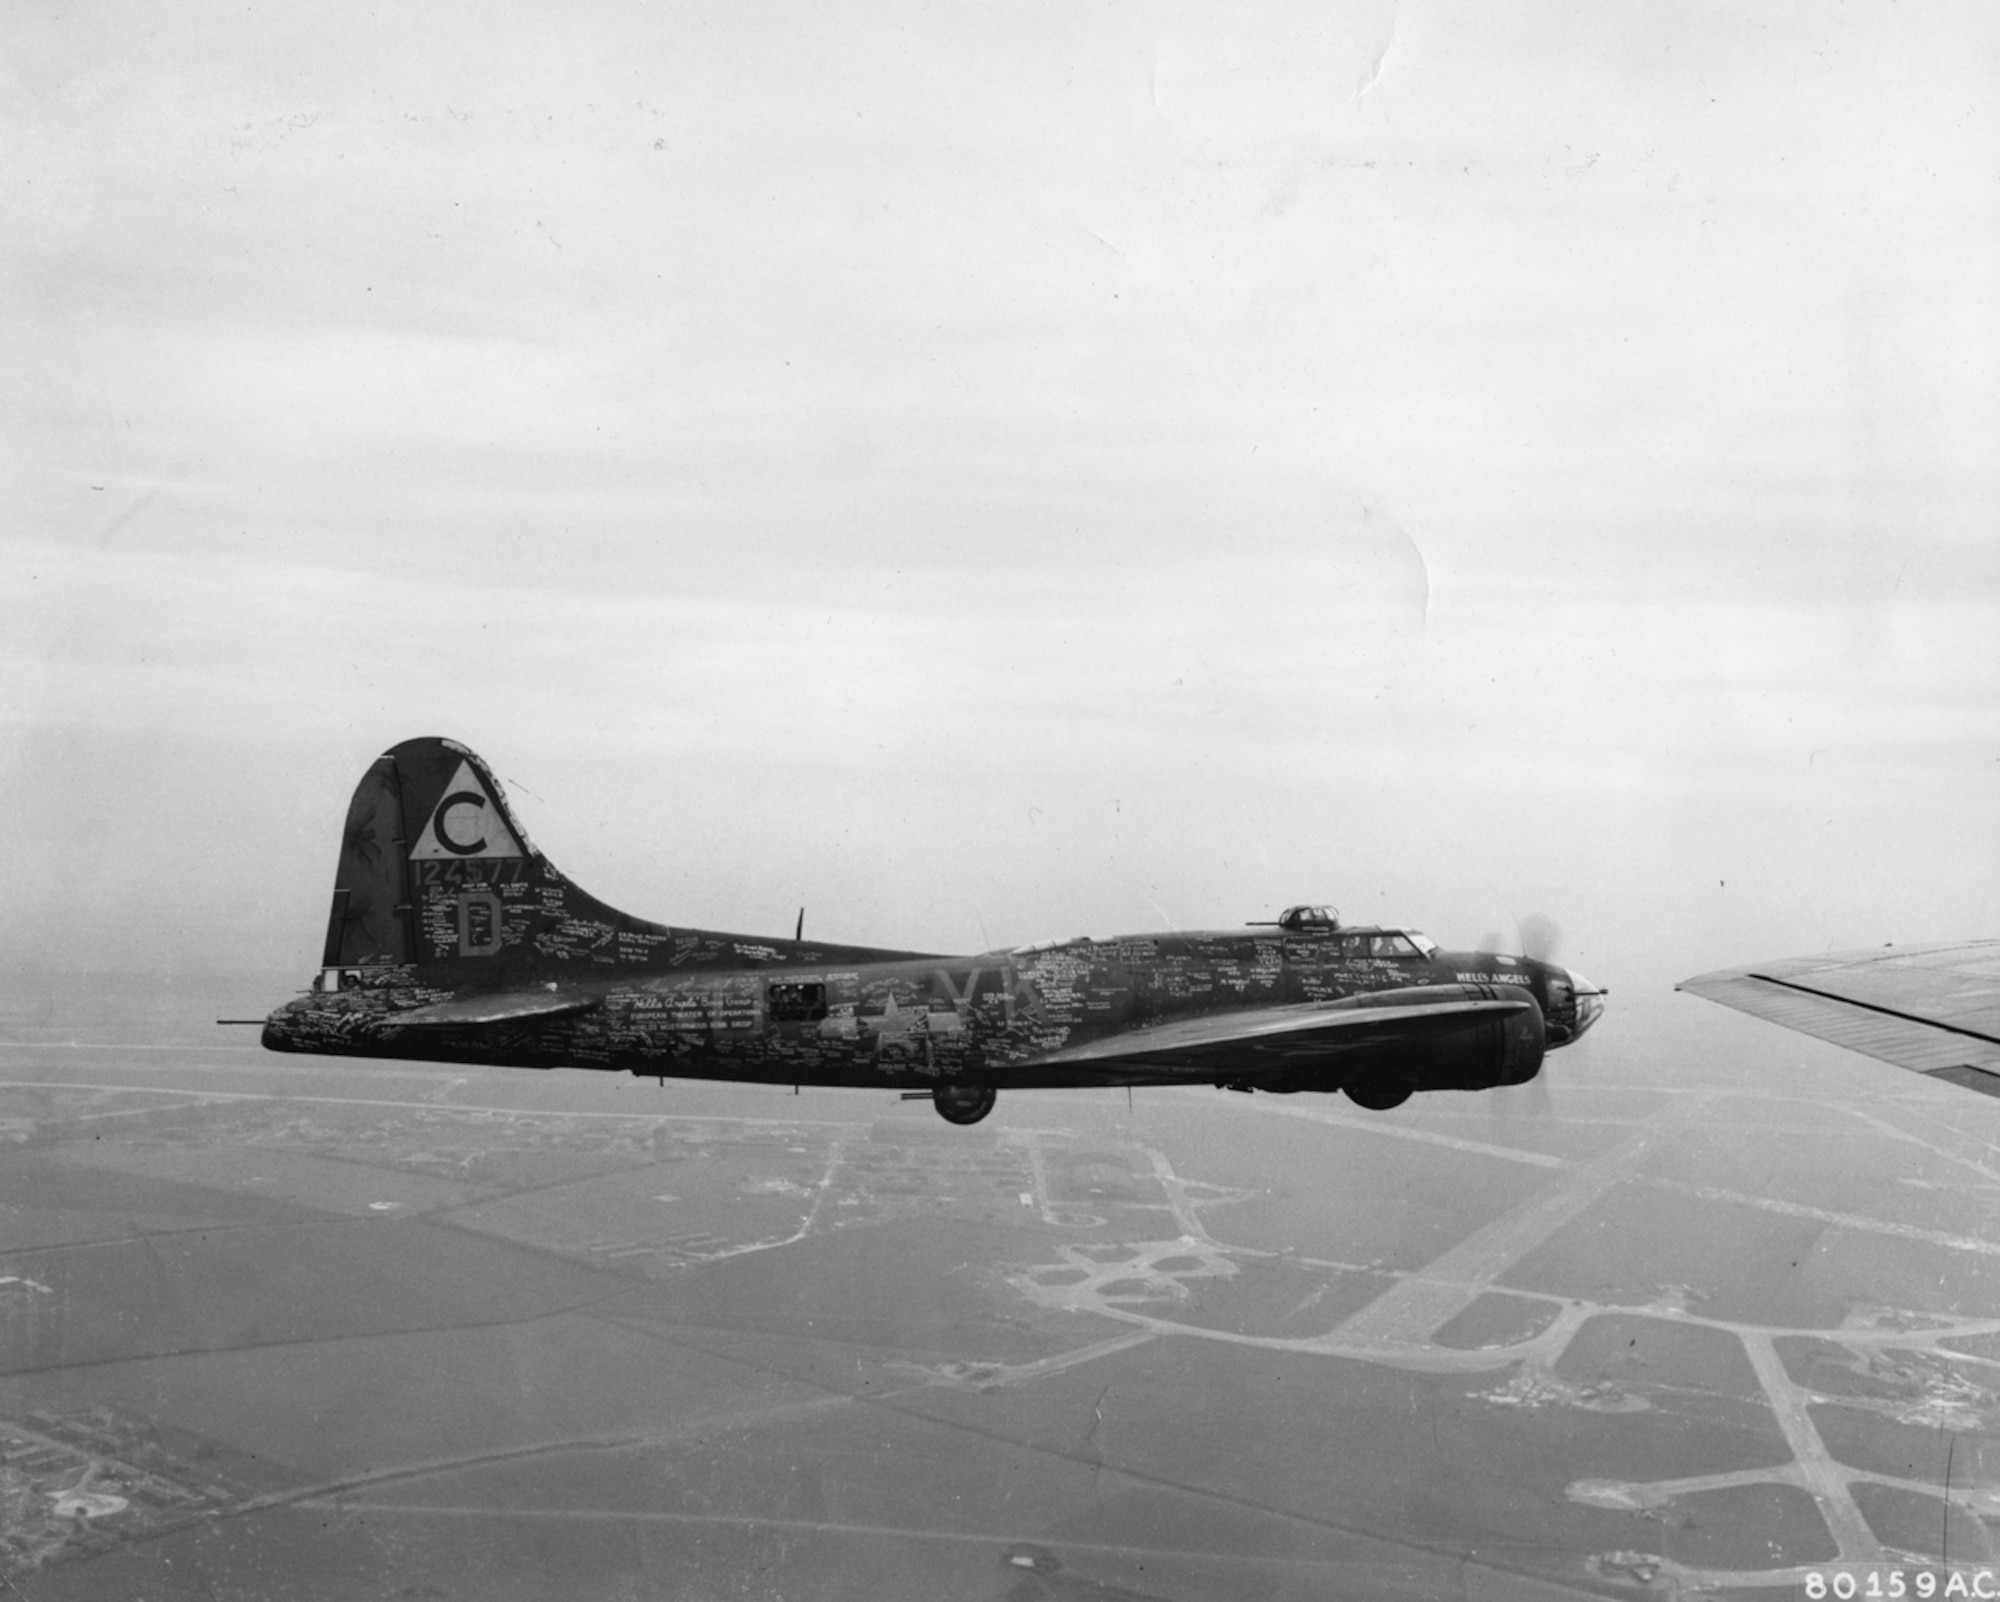 B-17 flying overland in WWII.